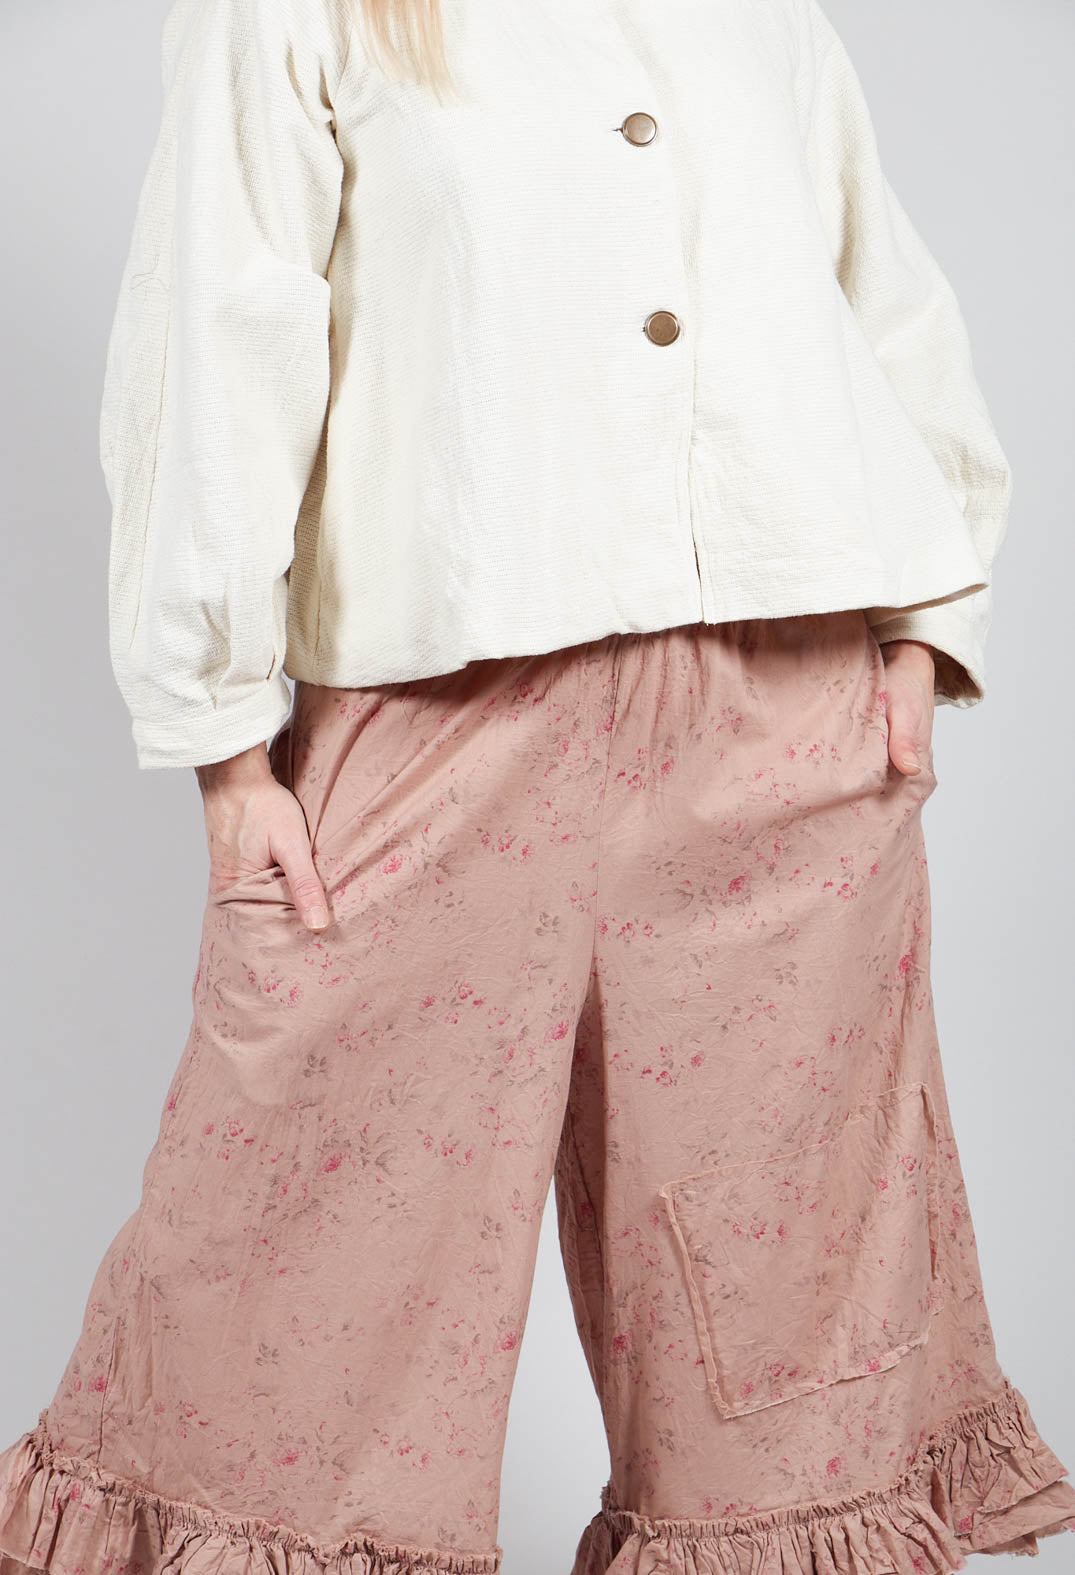 Goyave Trousers in Liberty Pink Print